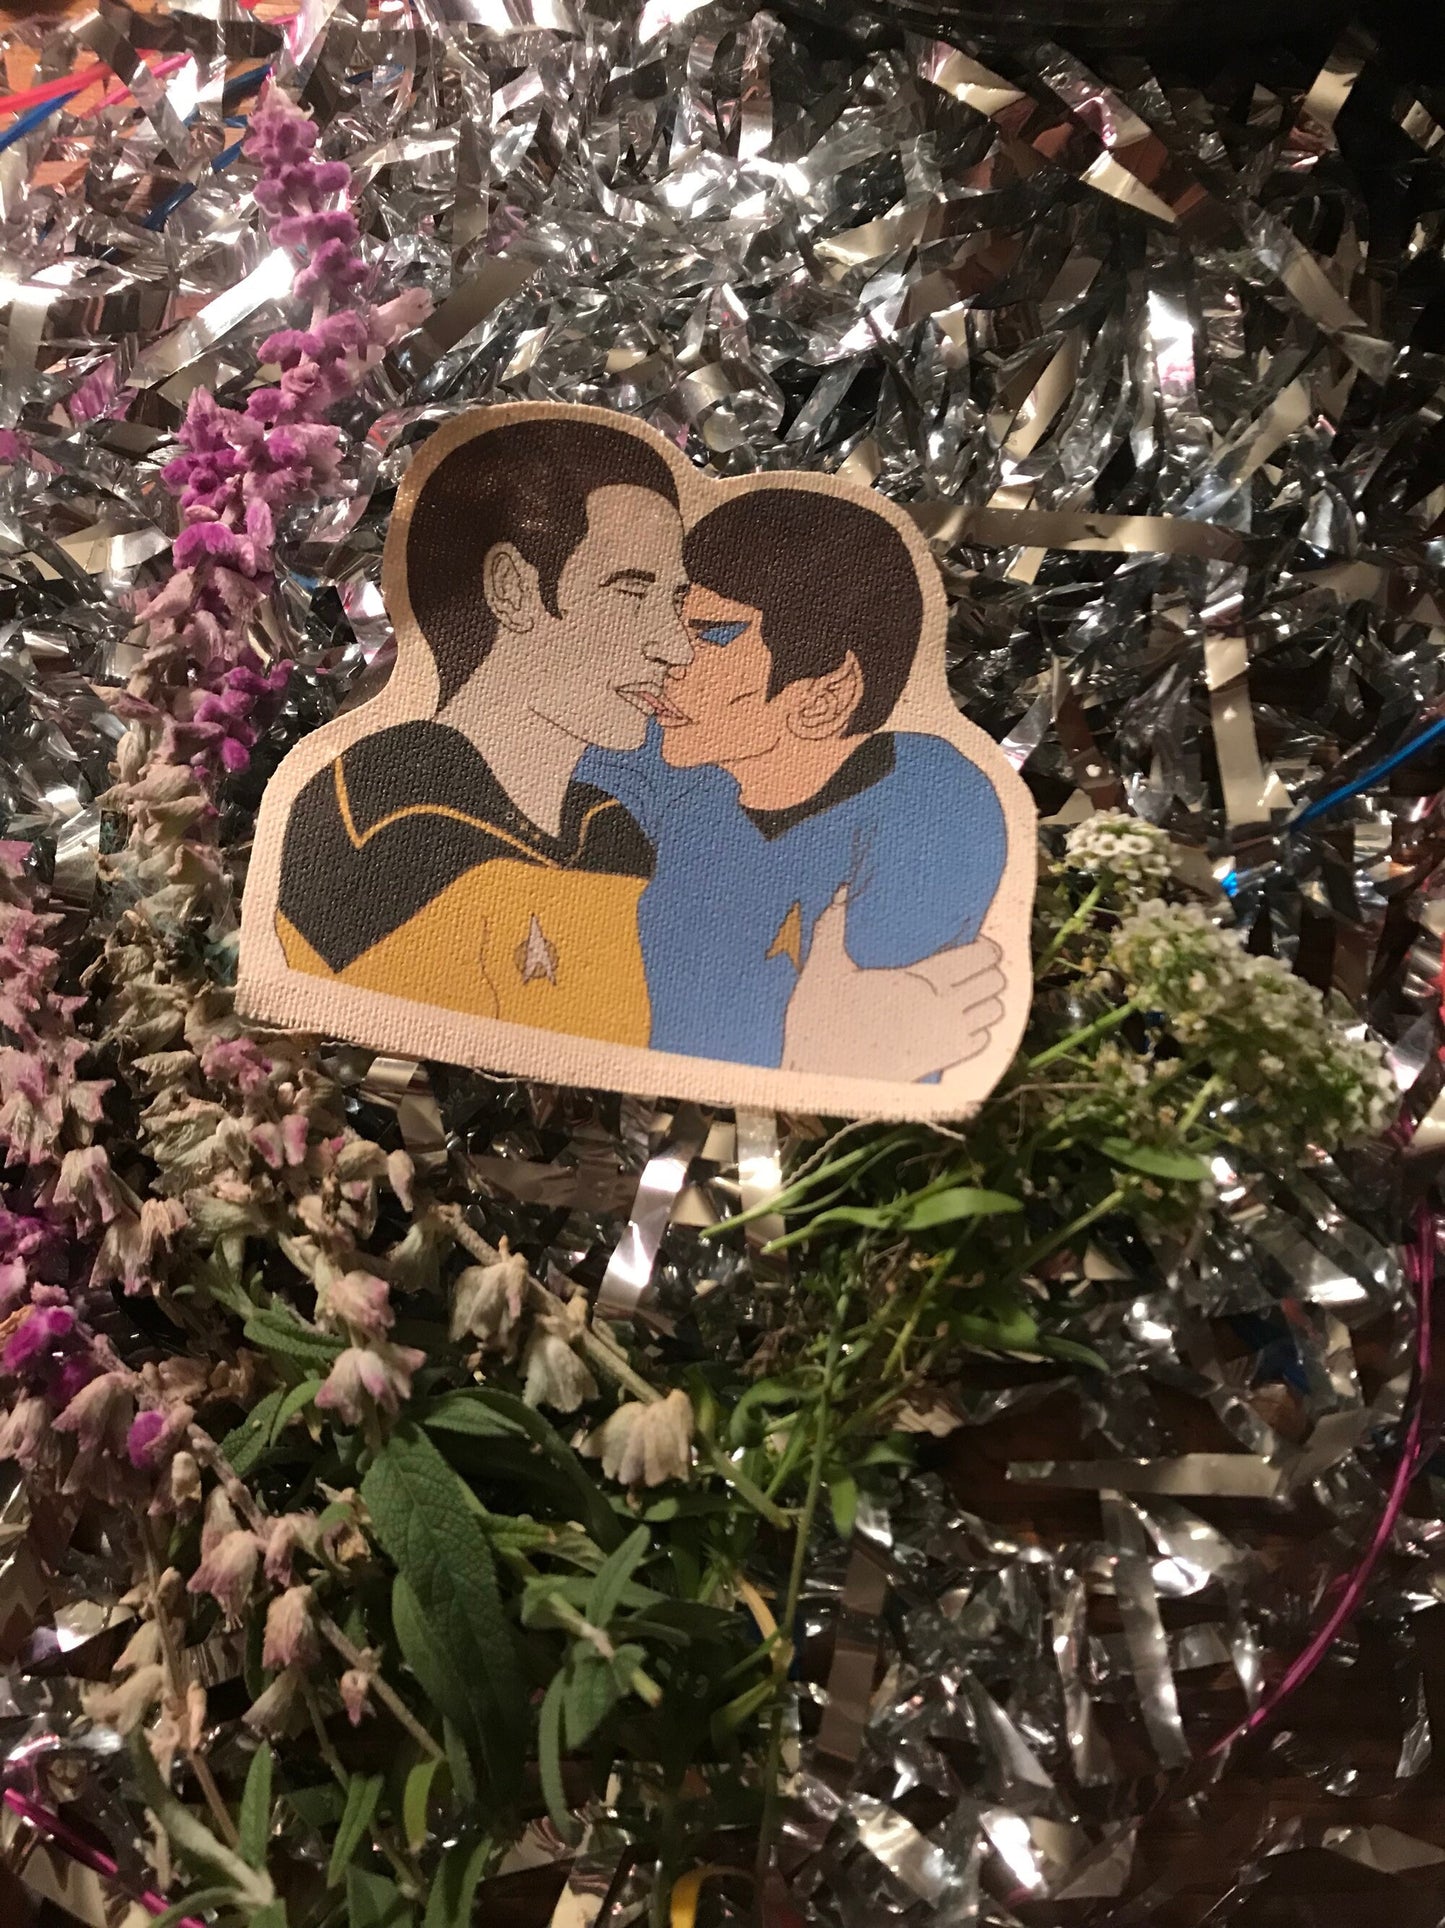 Spock and Data canvas patch